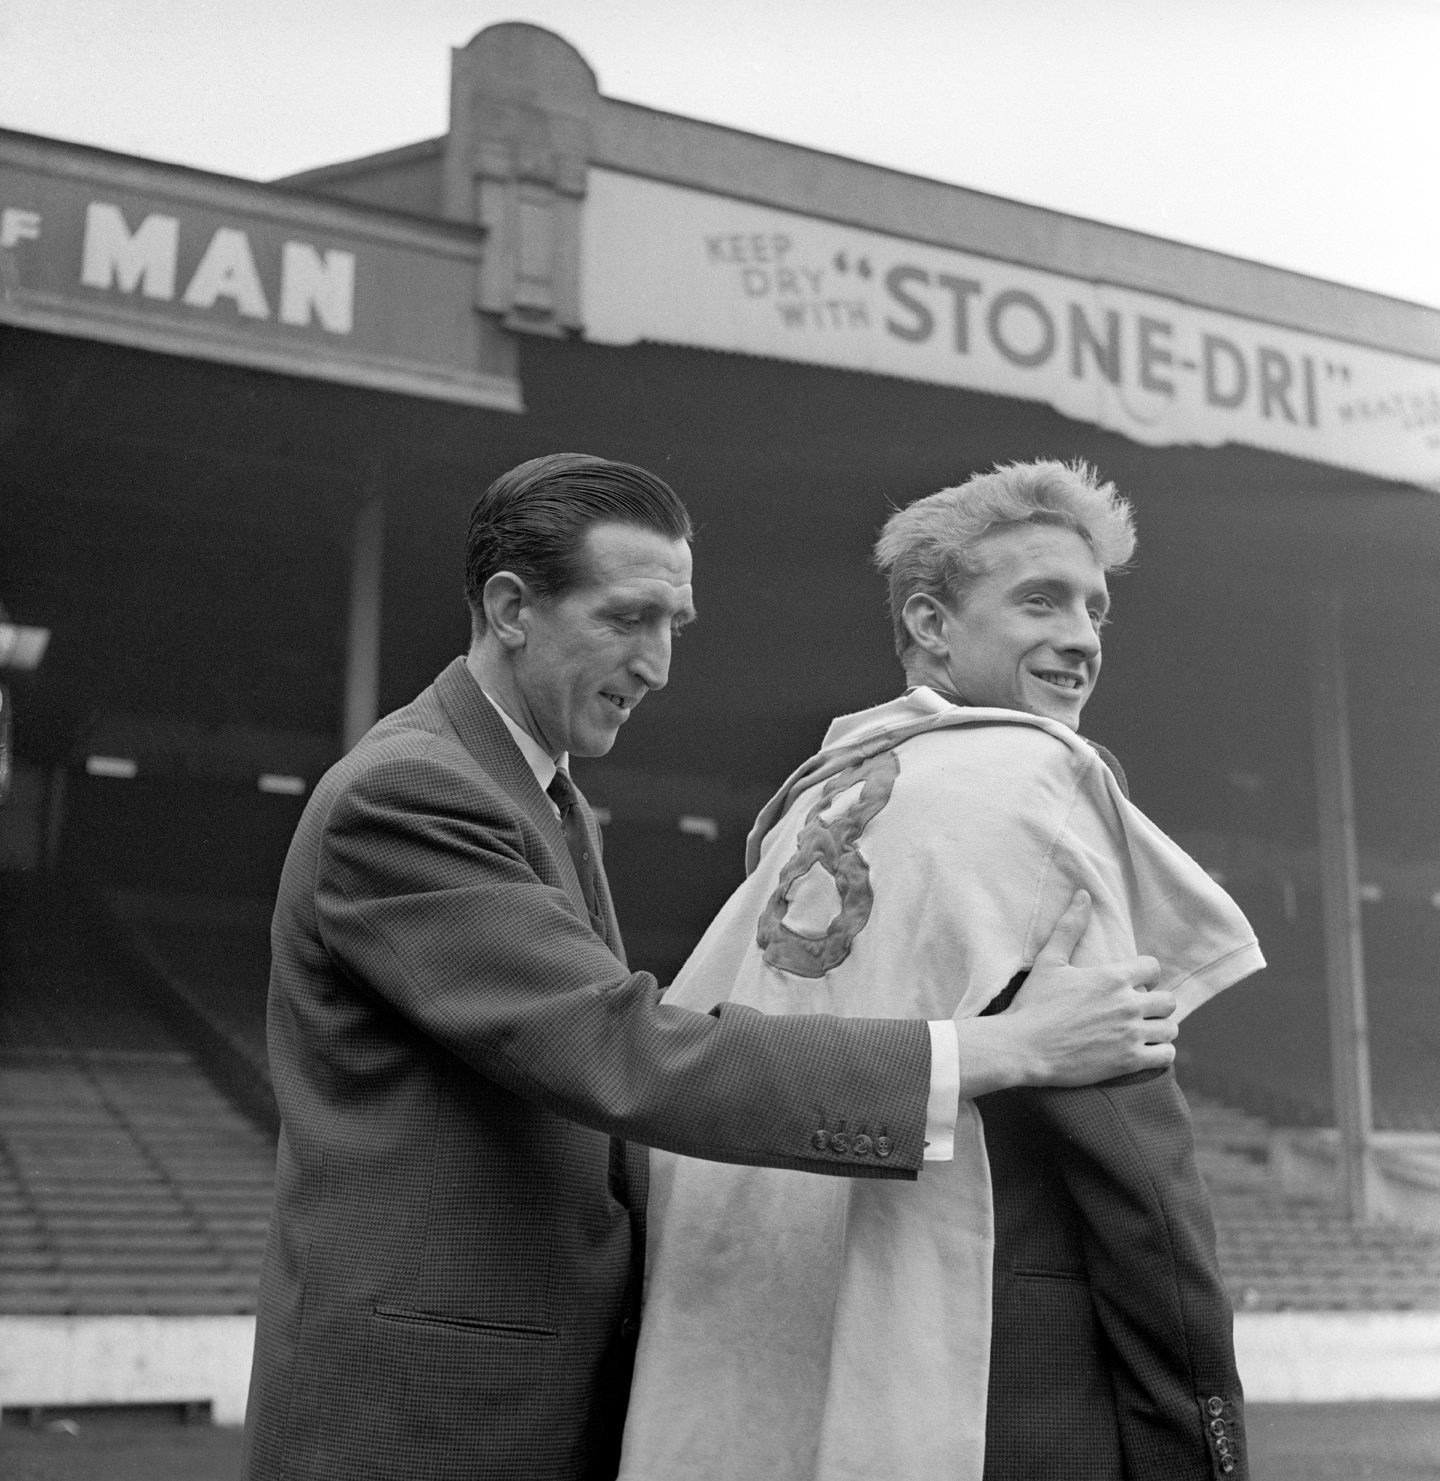 Ken Barnes, captain of Manchester City, with Law after he signed for a record transfer fee in 1960.